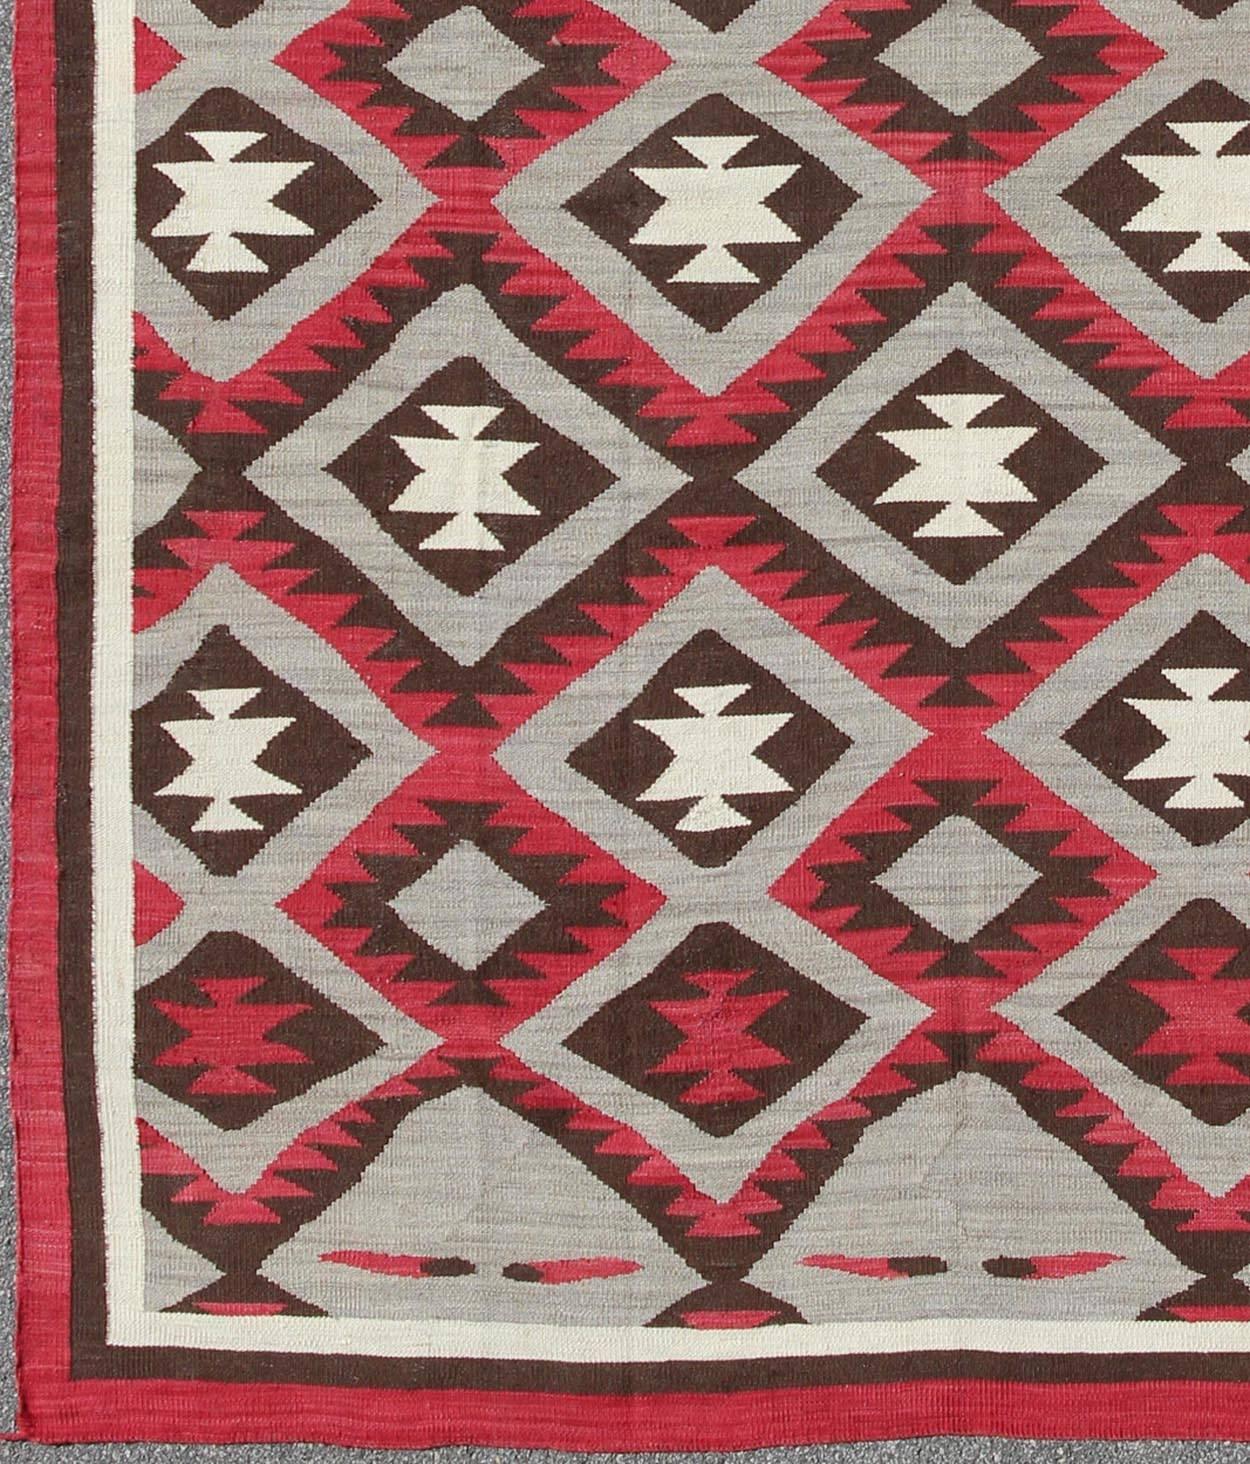 Contemporary American Navajo rug with latticework tribal design in red and gray, rug rsc-50668-ar-108, country of origin / type: North America / Navajo, circa early 21st century

This intriguing contemporary Navajo rug was woven in the United